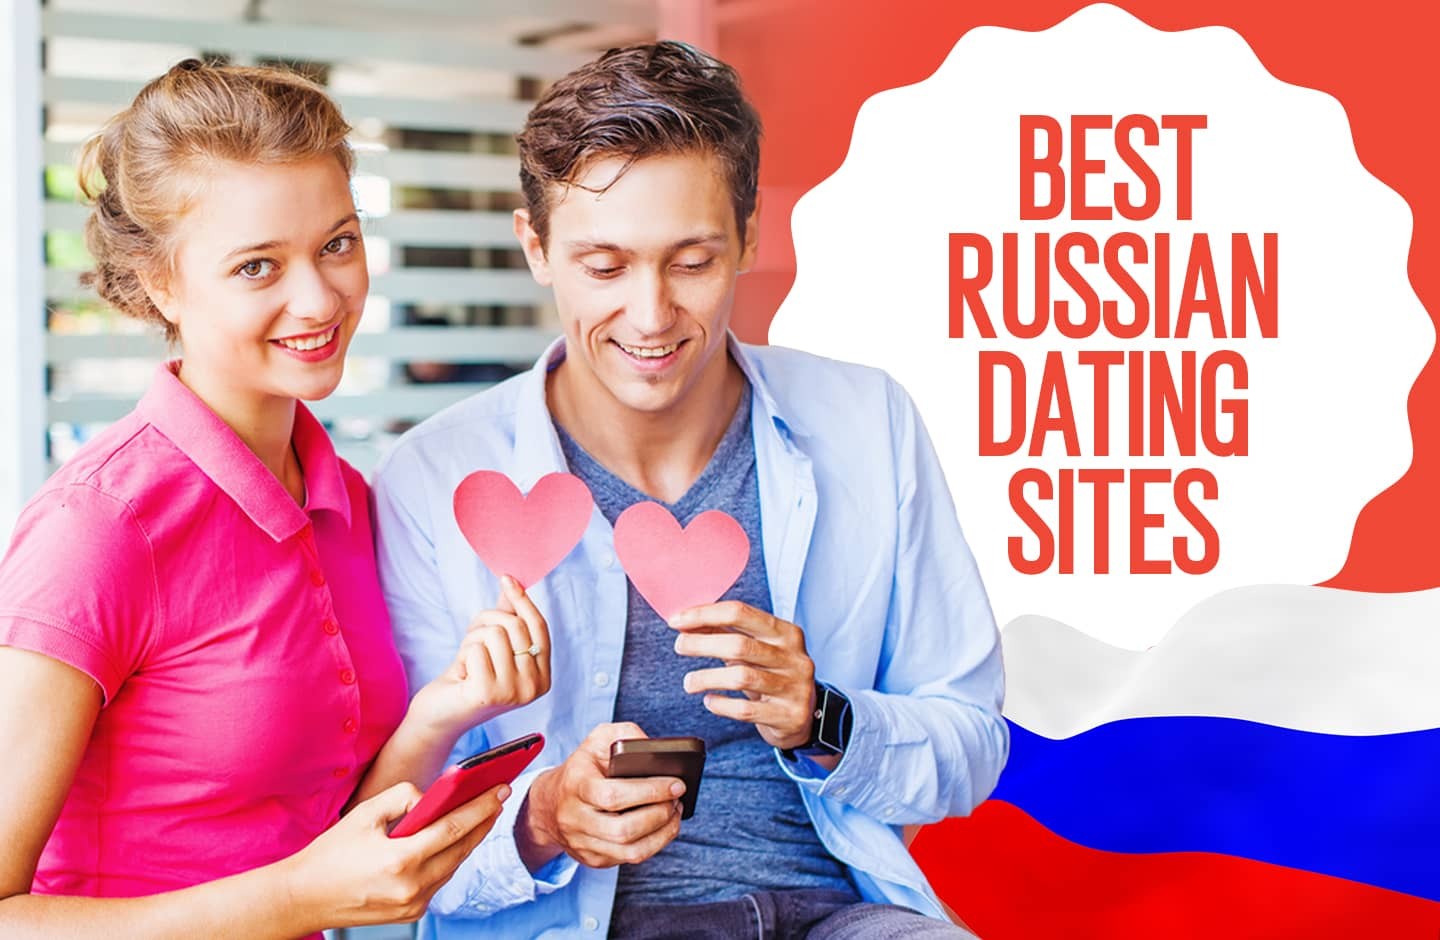 Dating russian Online Profiles